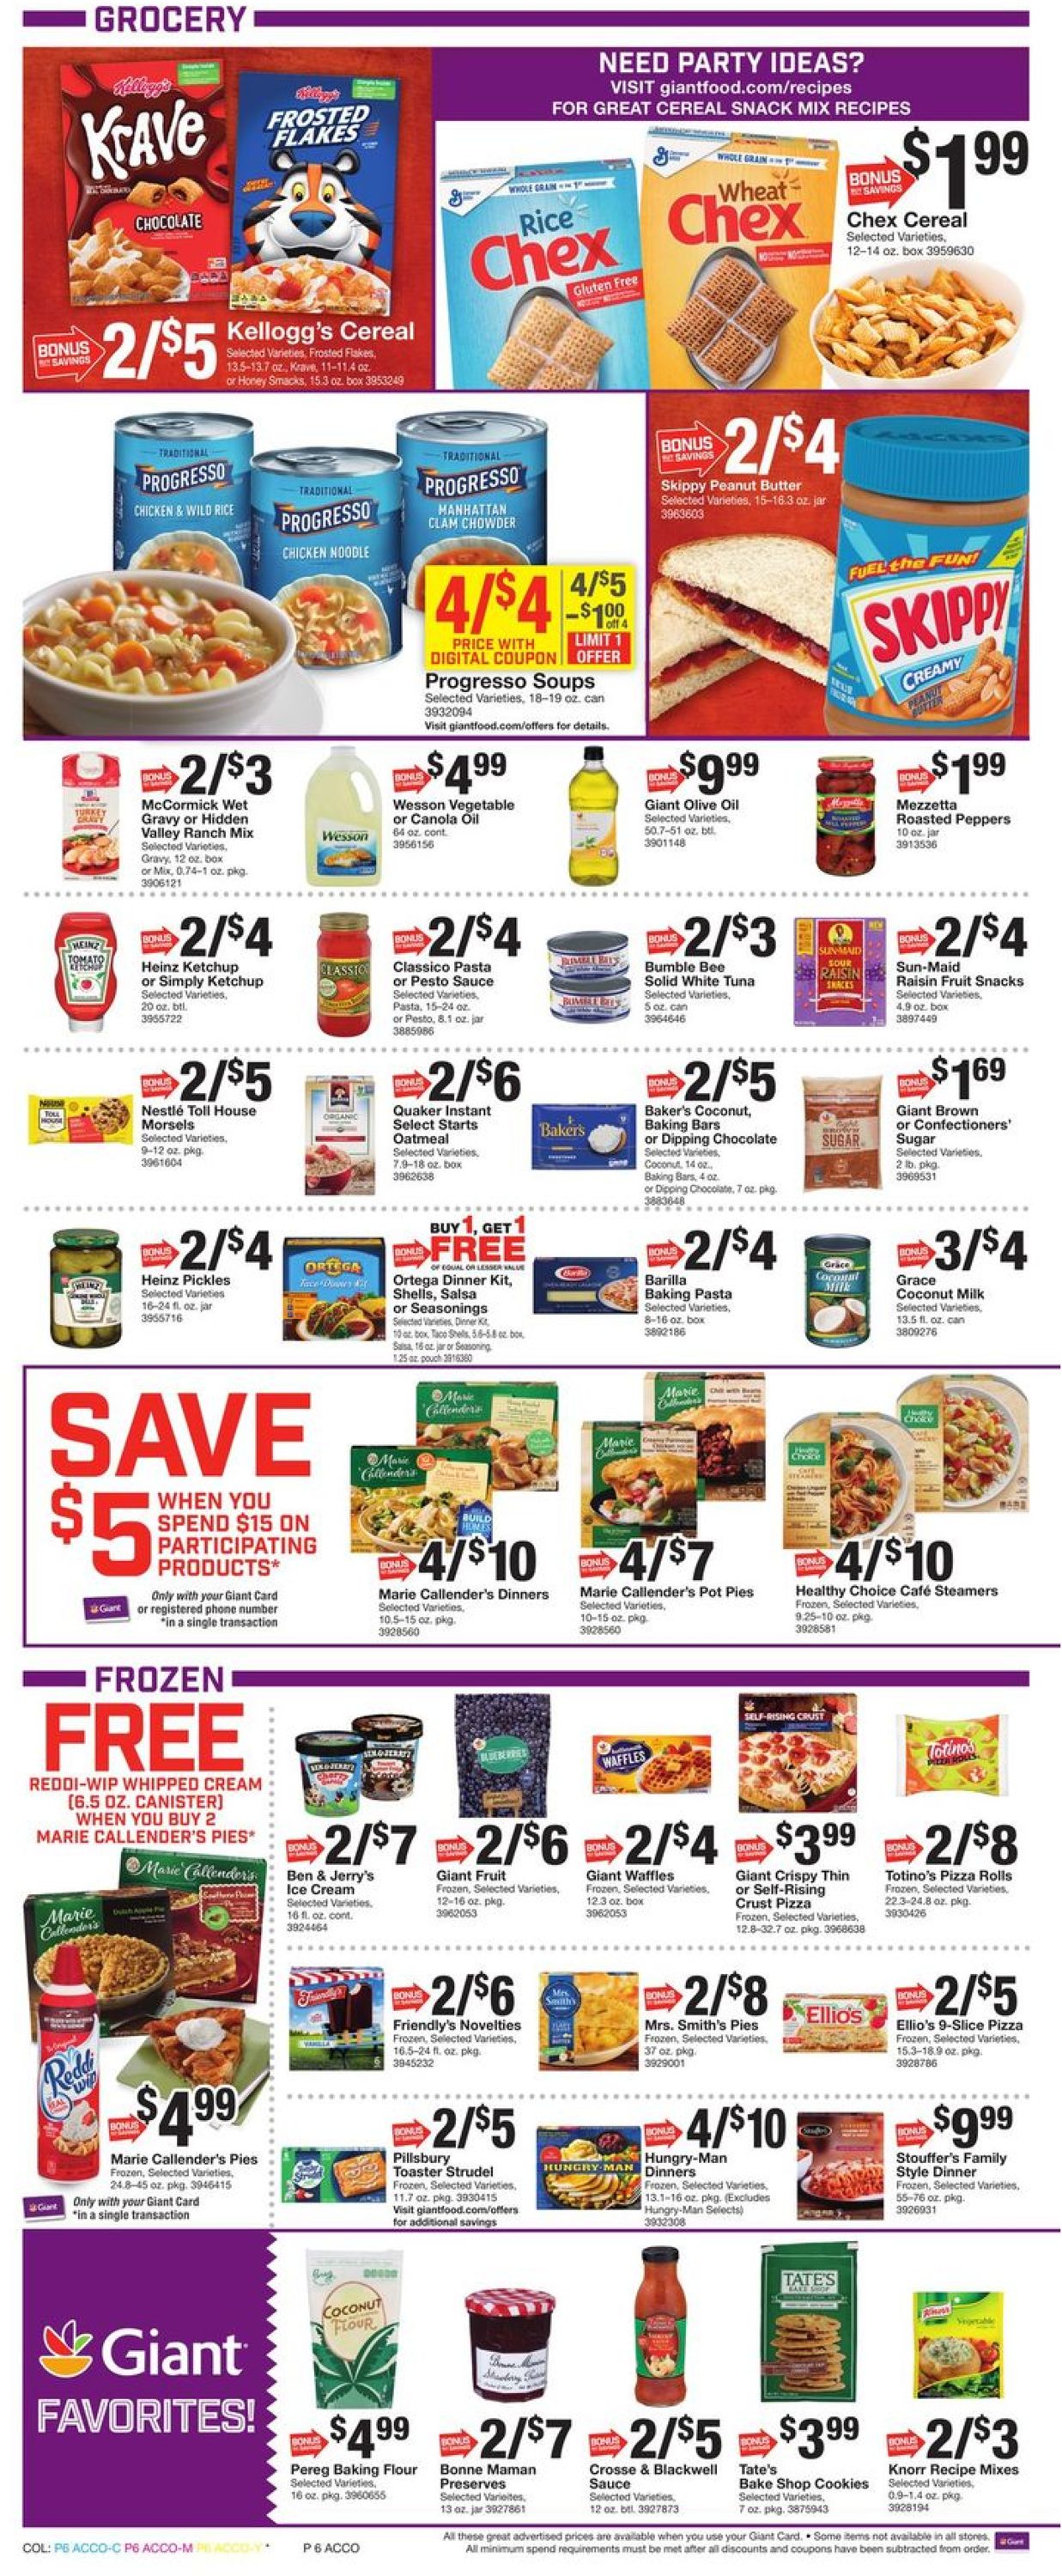 Giant Food - Thanksgiving Ad 2019 Weekly Ad Circular - valid 11/22-11/28/2019 (Page 9)